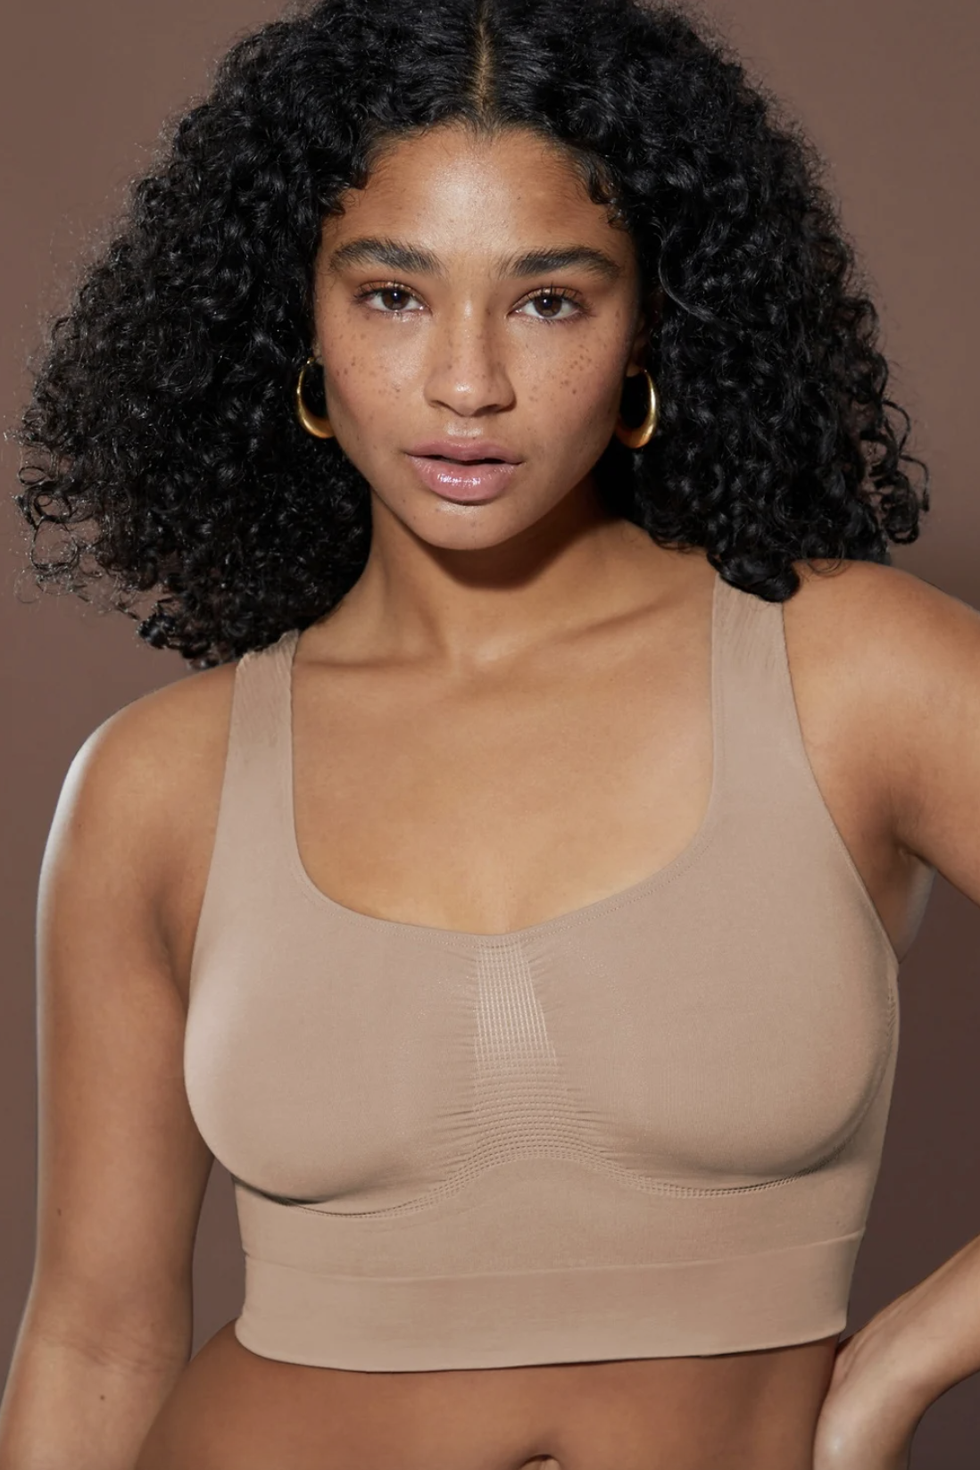 Nearly Naked Shaping Cami Tank - Fabletics